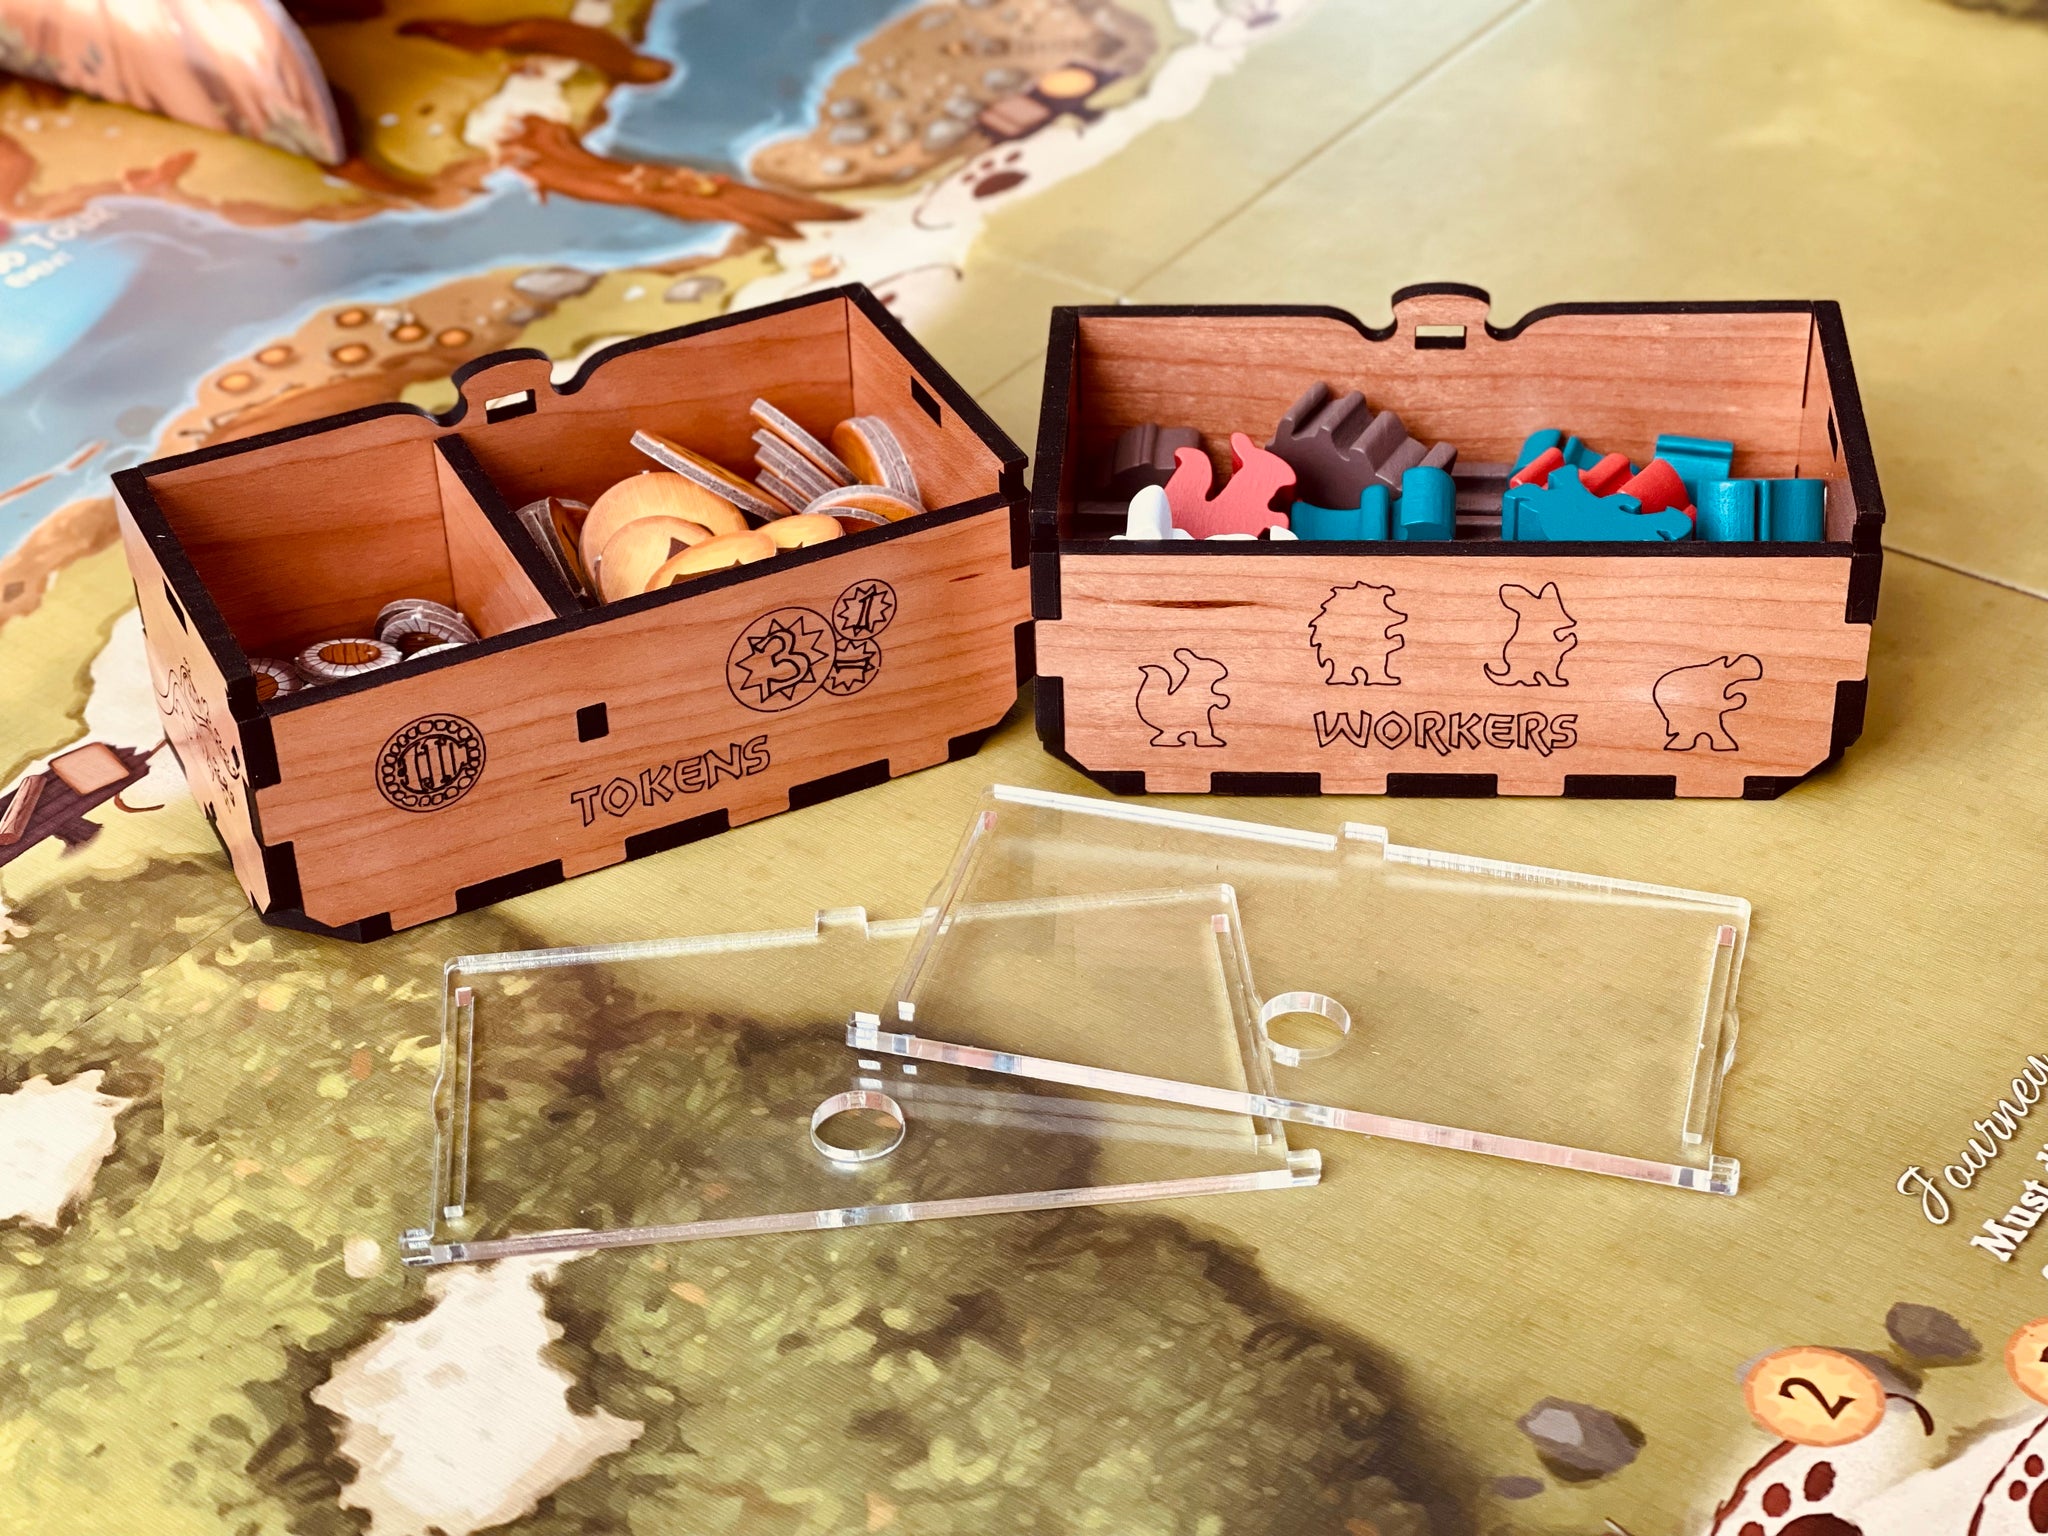 Storage Boxes for Everdell – The Shipshape Gamer